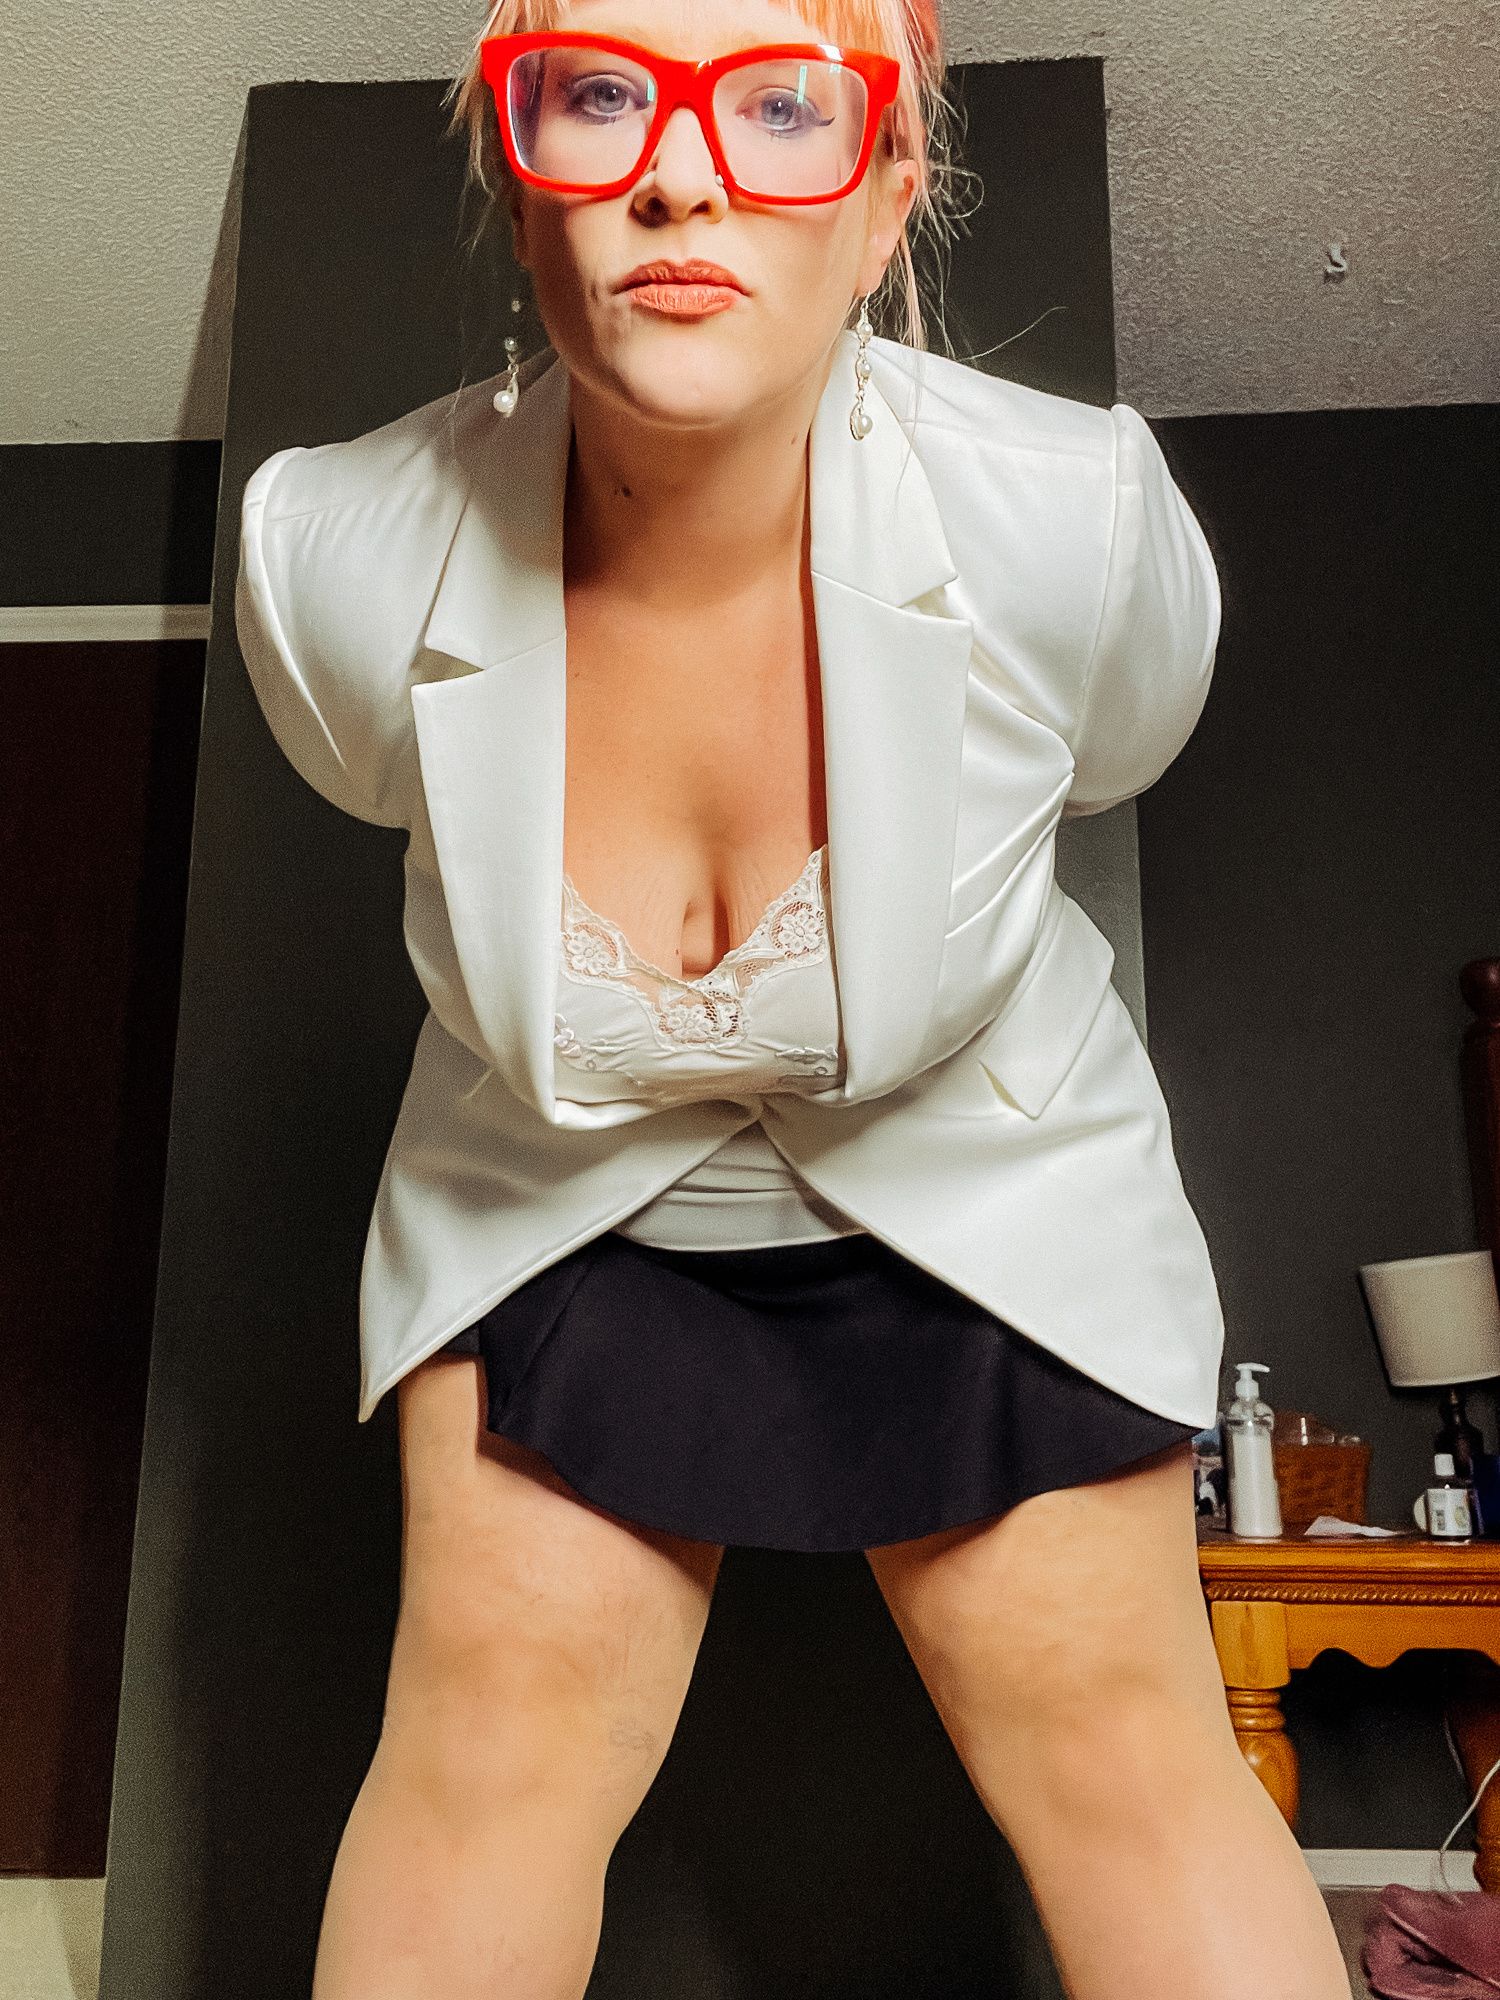 BBW in a mini black skirt and nylons with heels Big Thighs #6